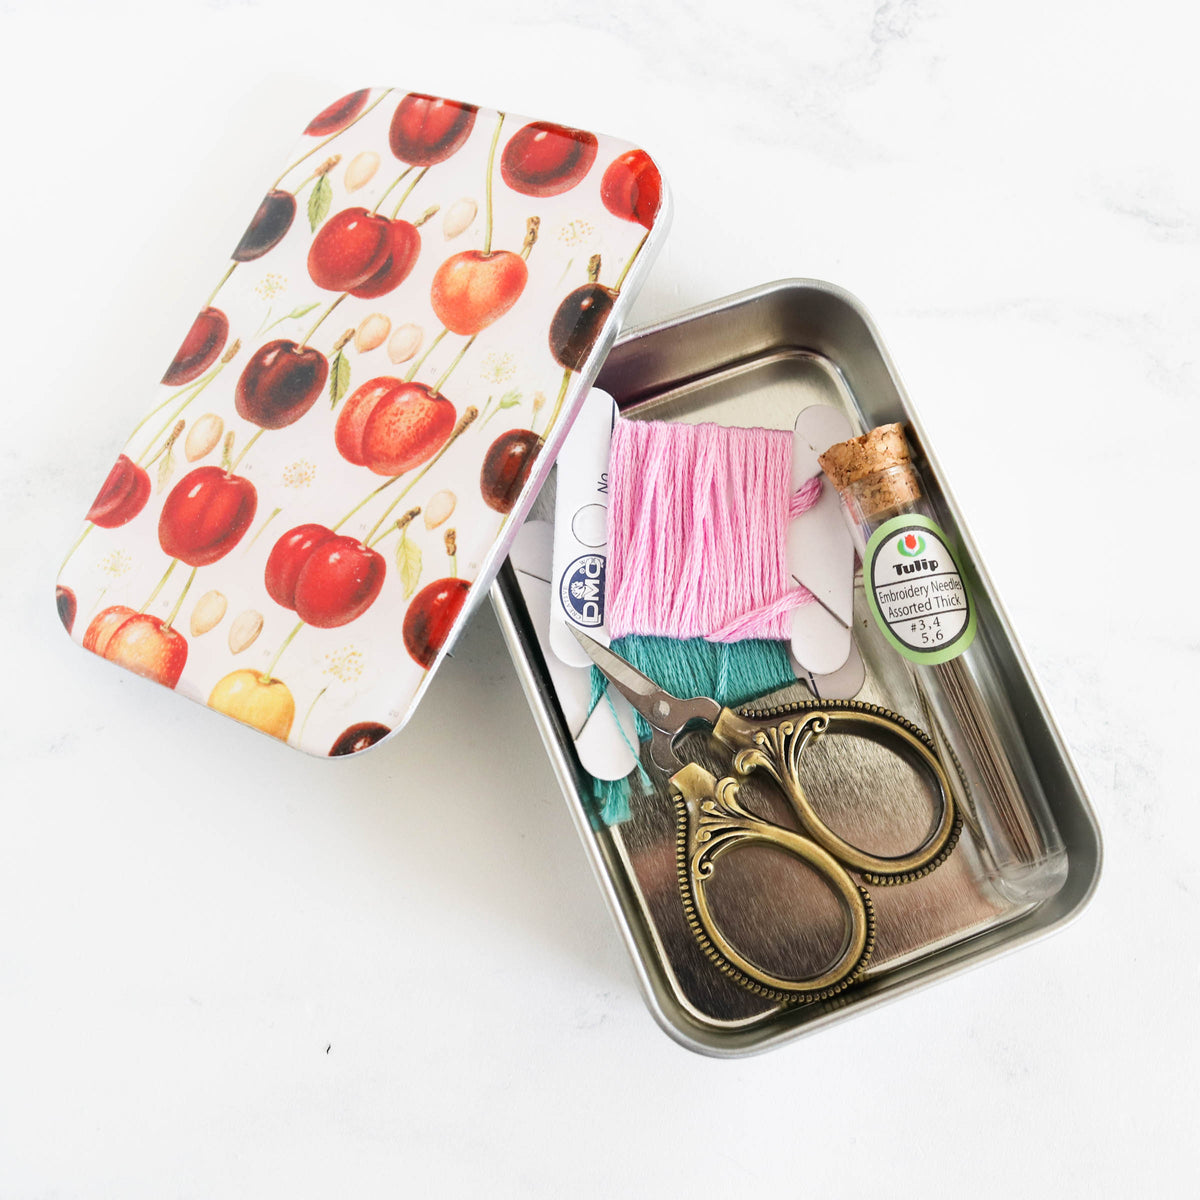 Vintage-Inspired Storage and Notions Tins - Cherry